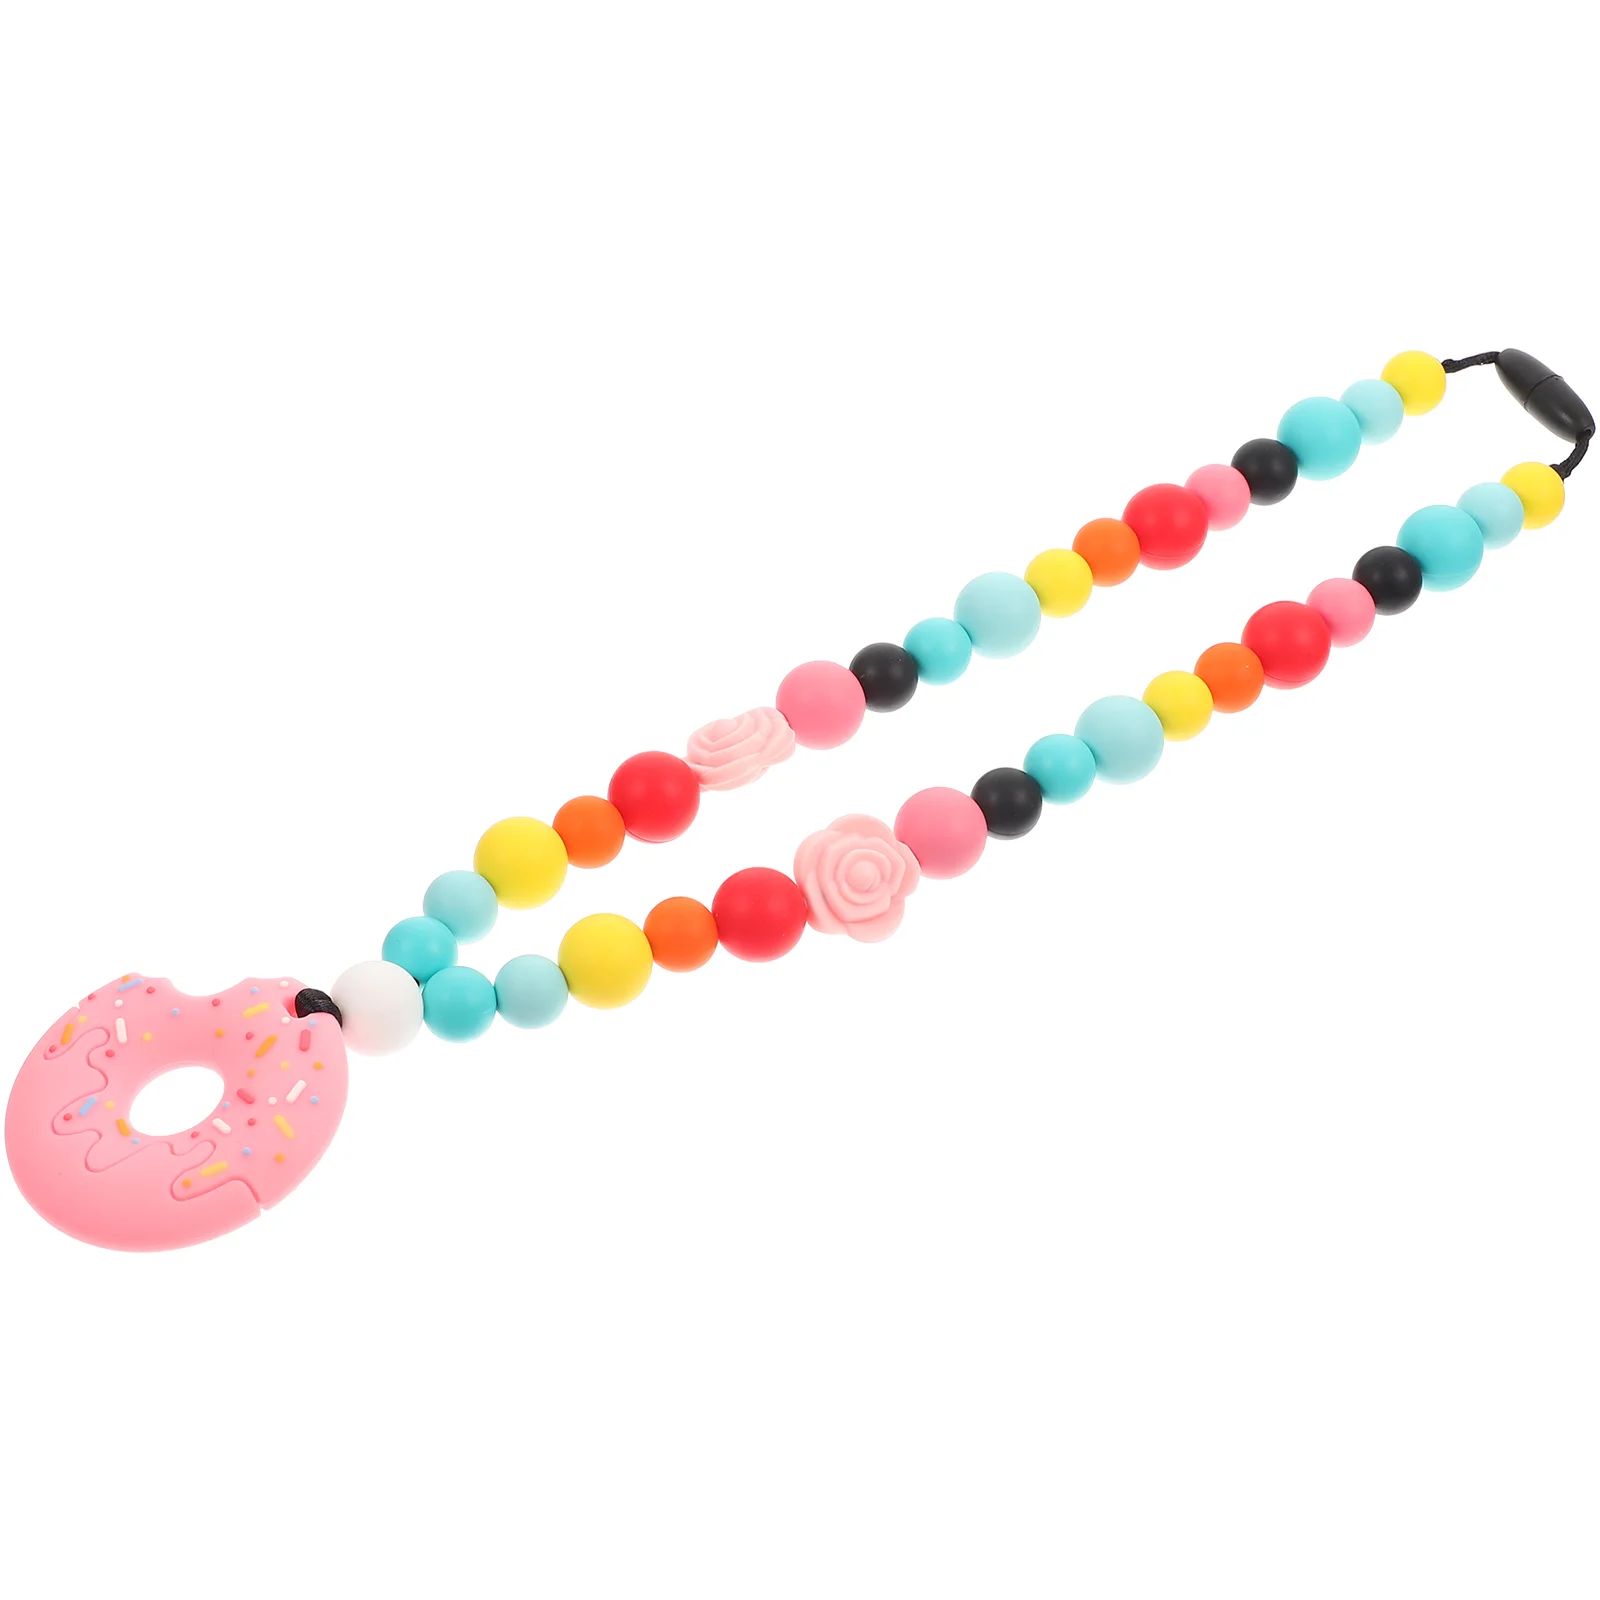 

Necklace Baby Toys Teething Toy Silicone Teether Chew Grabbing Chewing Toddle Props Girl Chewable Necklaces Sensory Jewelry Kids